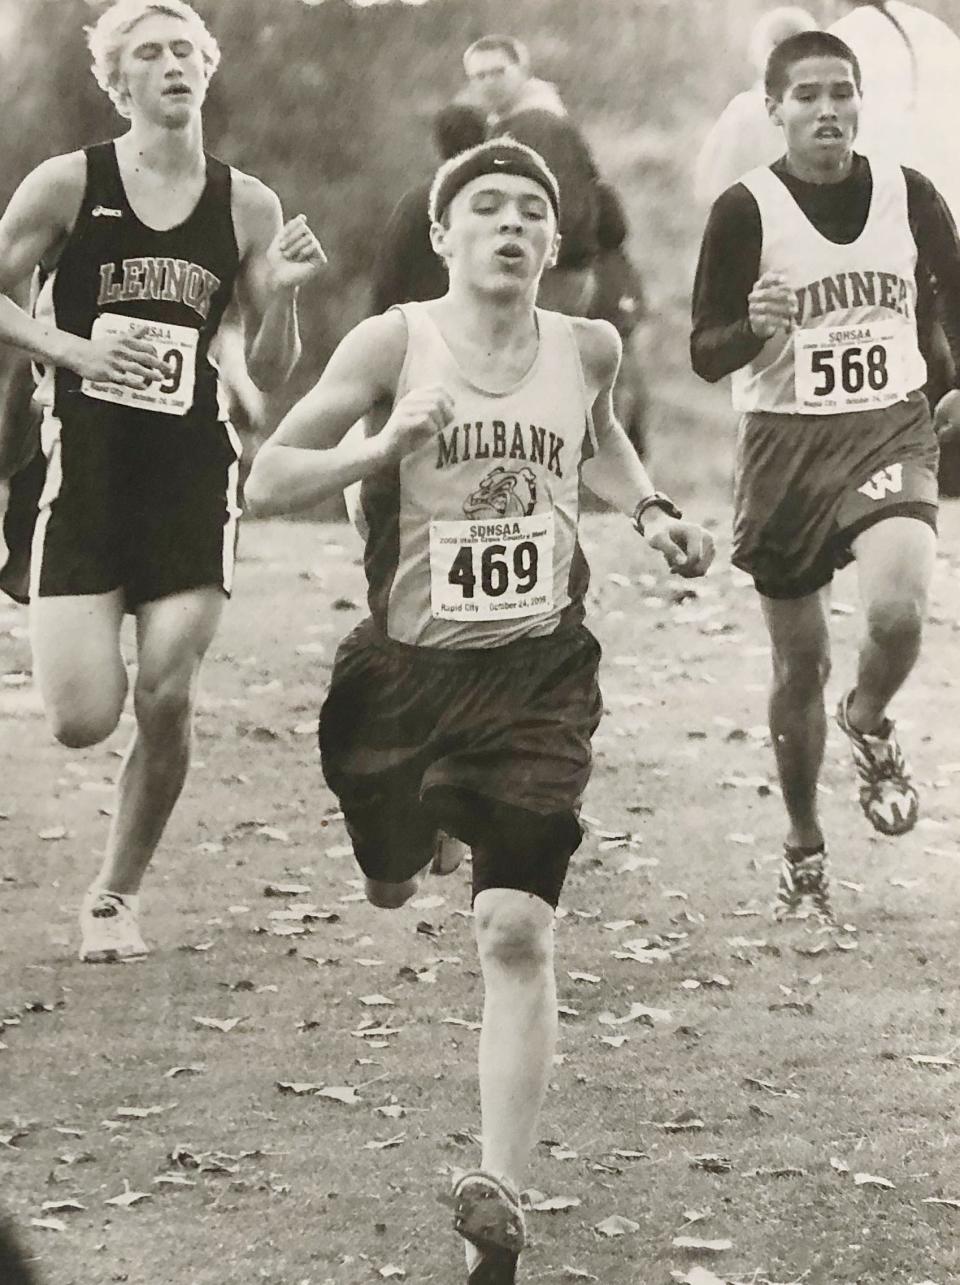 Jalen Snaza of Milbank was a four-time Class A boys medalist in the state high school cross country meet from 2008-2011.